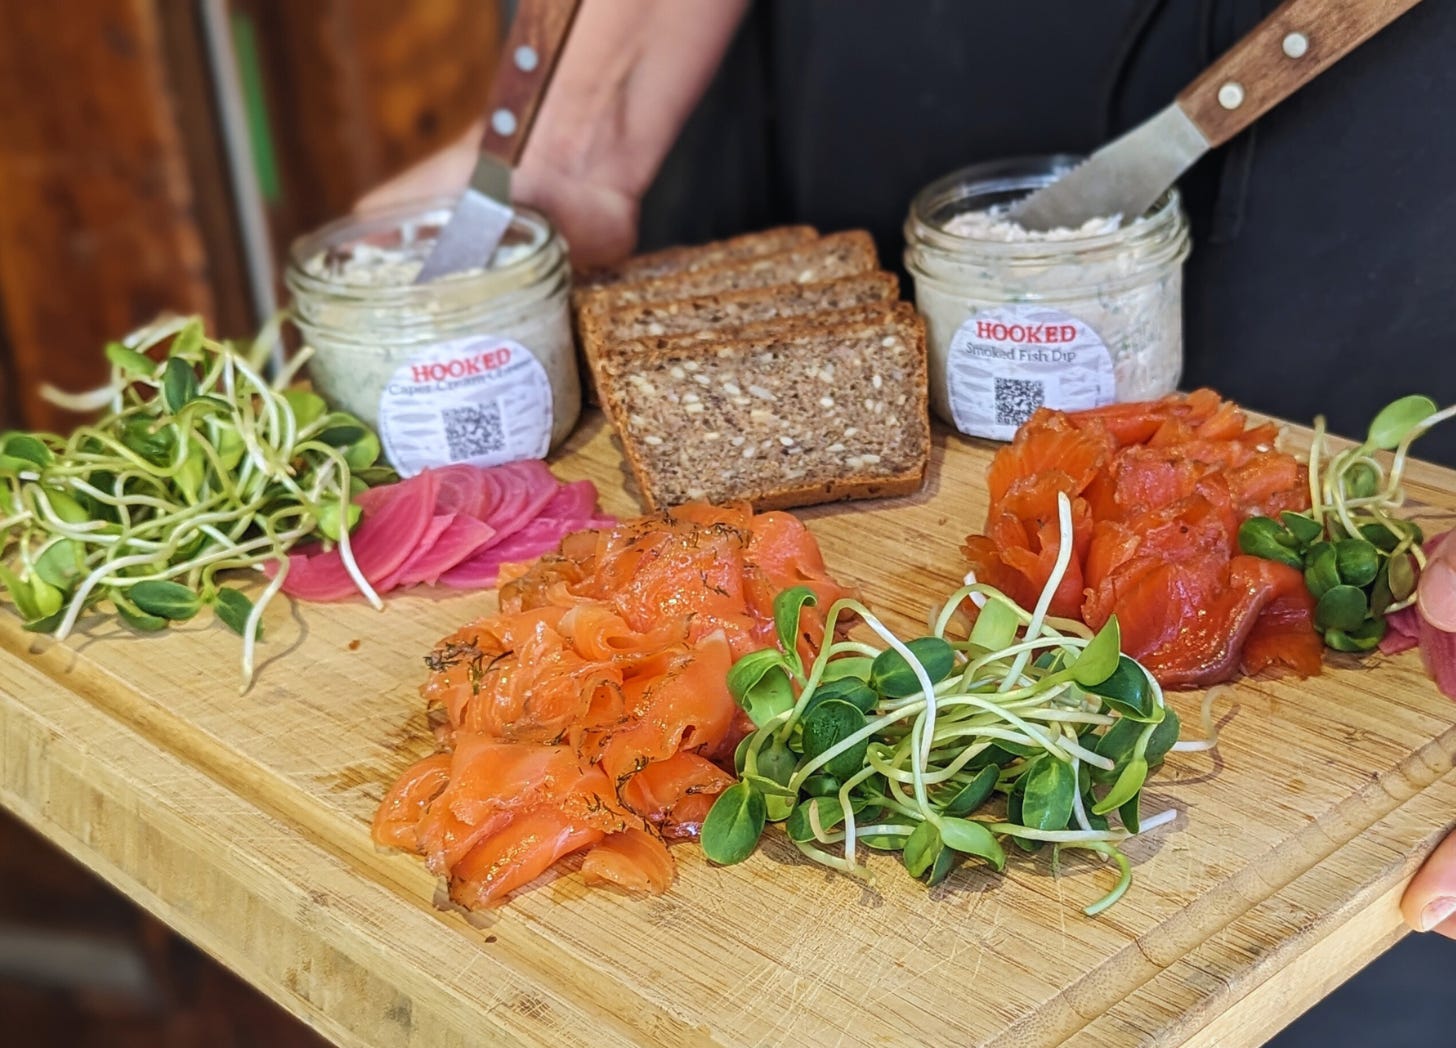 hands hold a wood board with piles of artfully arranged fixings for smoked fish: three piles of sunflower greens, two arranged servings of smoked fish with some dill sprinkles, two jars with cream cheese and smoked fish dip, two servings of sliced pickled beets and homemade rye bread.